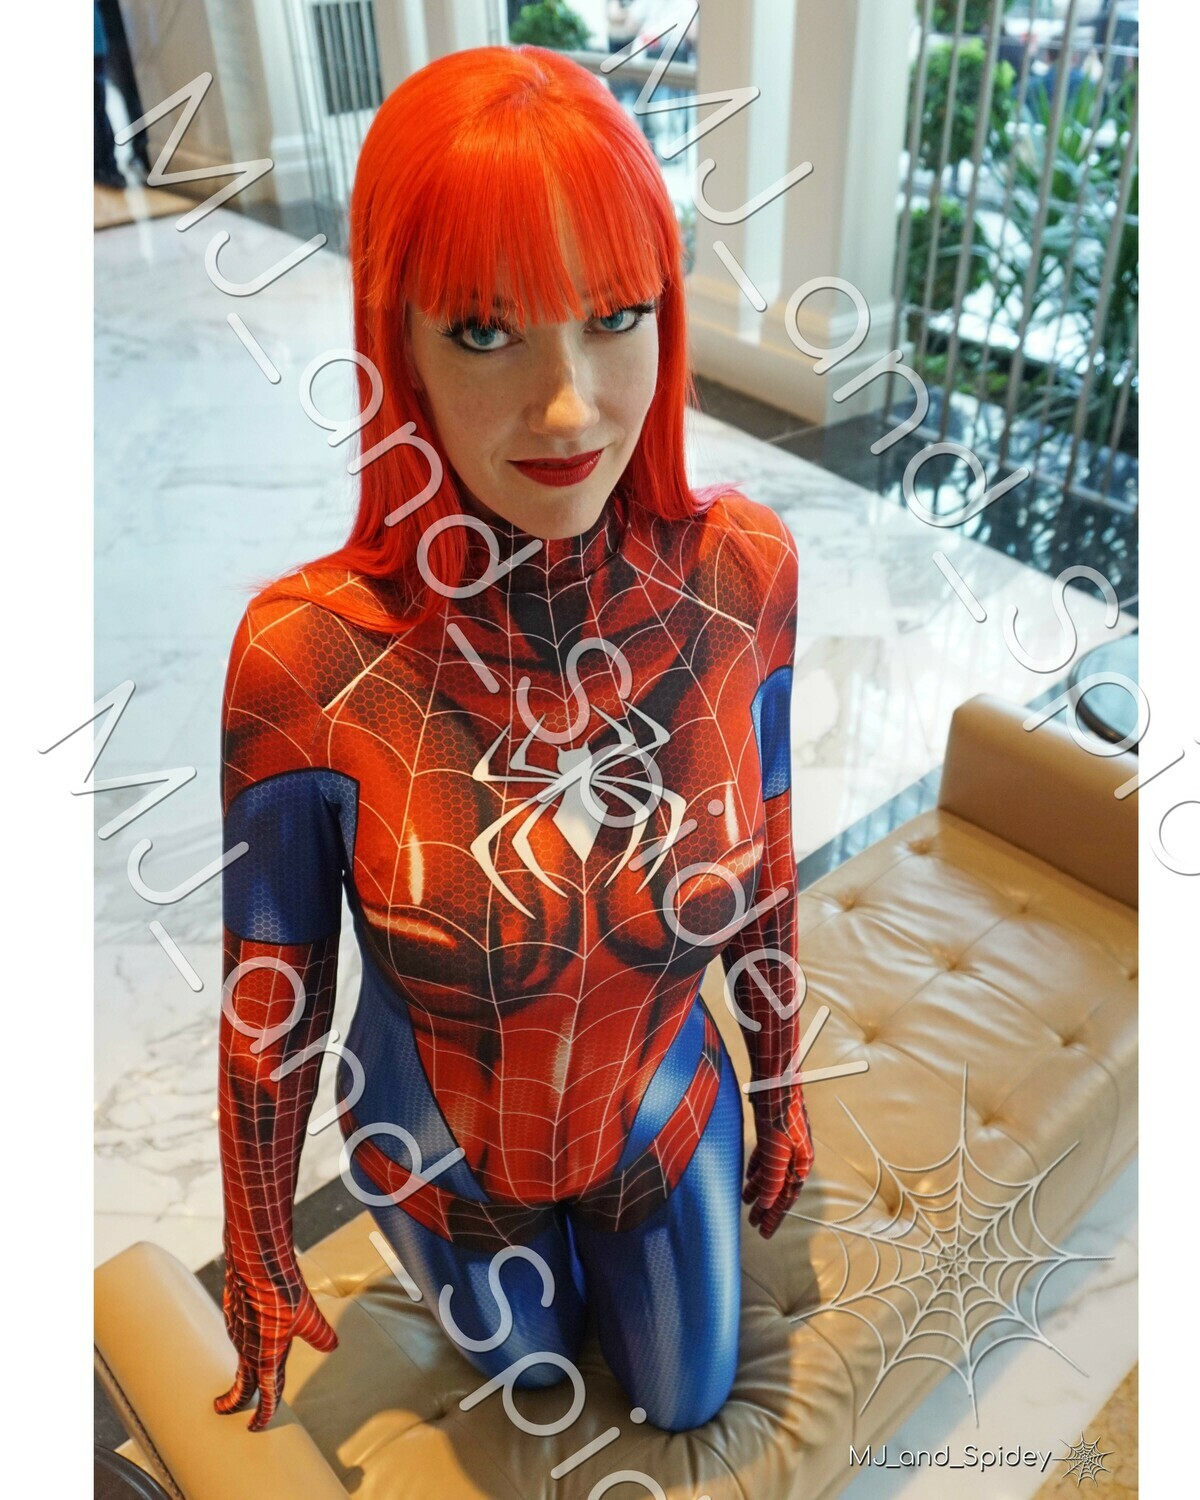 Marvel - Spider-Man - Mary Jane Watson - Classic Spider-Suit - MAGFest 1 - Cosplay Print (@MJ_and_Spidey, MJ and Spidey, Comics)